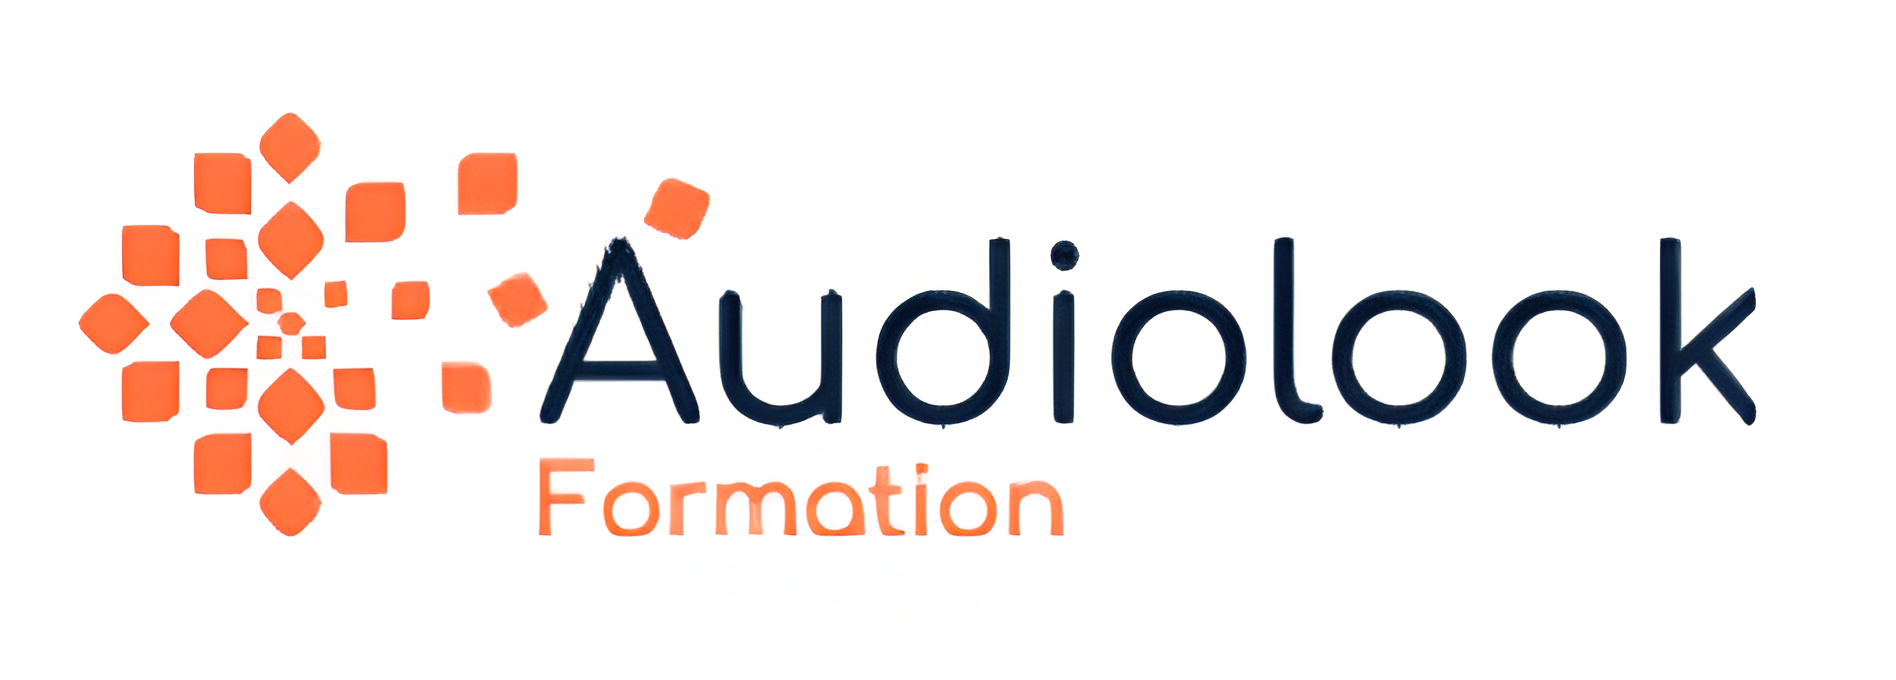 Audiolook Formation